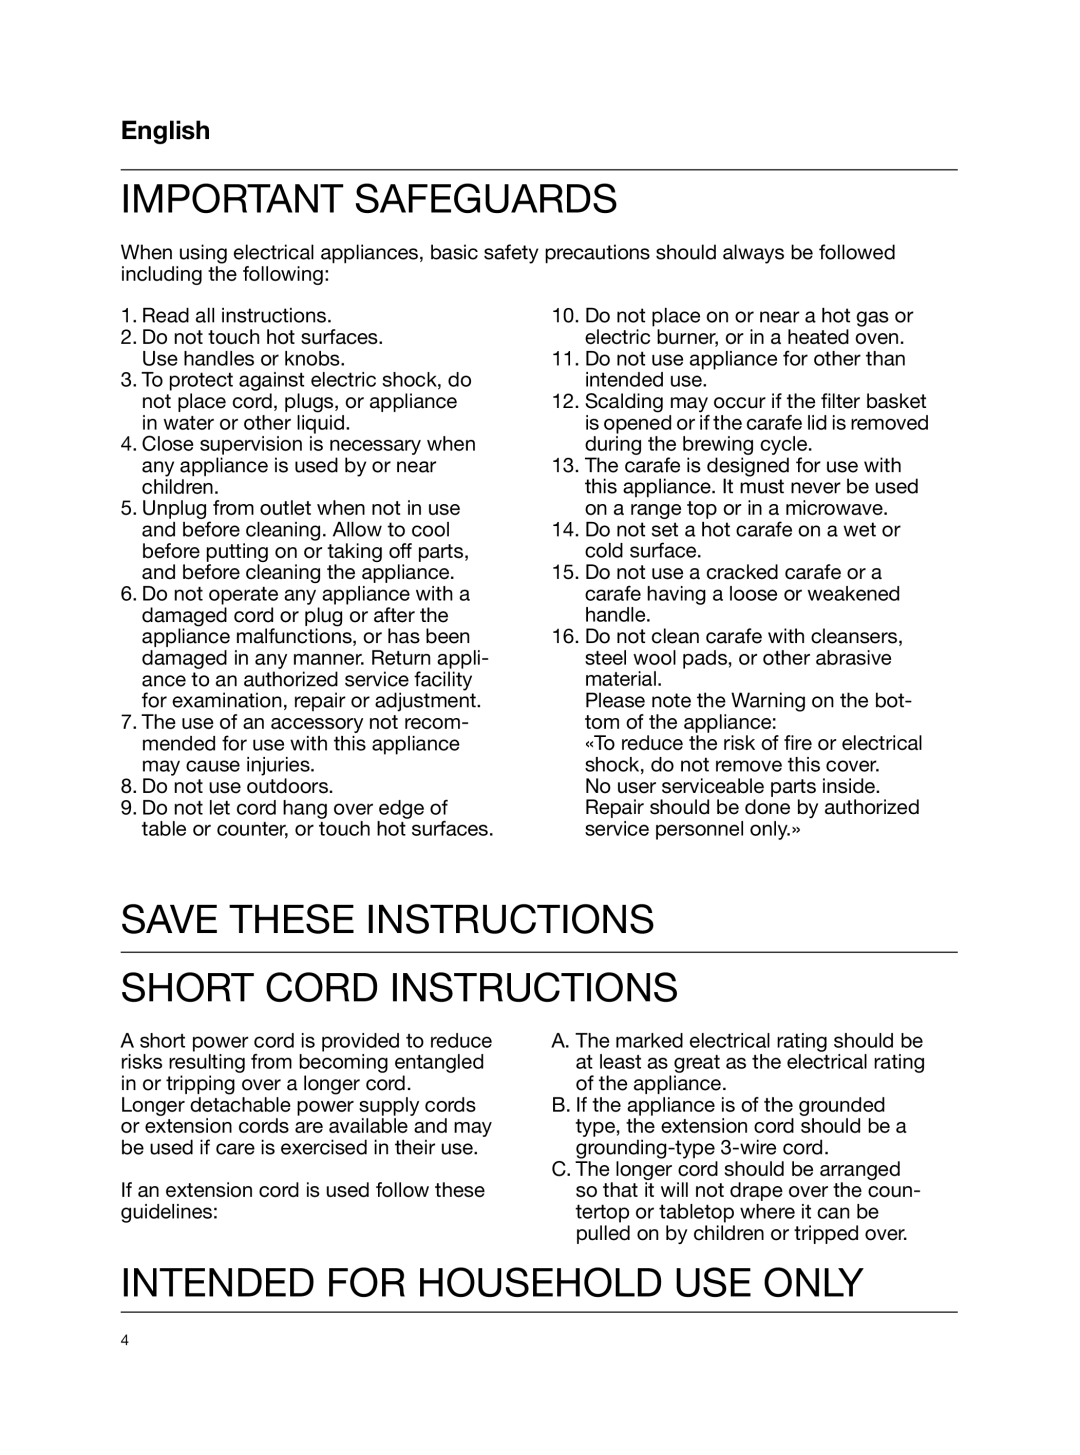 Braun KF580, KF590E Important Safeguards, Save These Instructions Short Cord Instructions, Intended For Household Use Only 